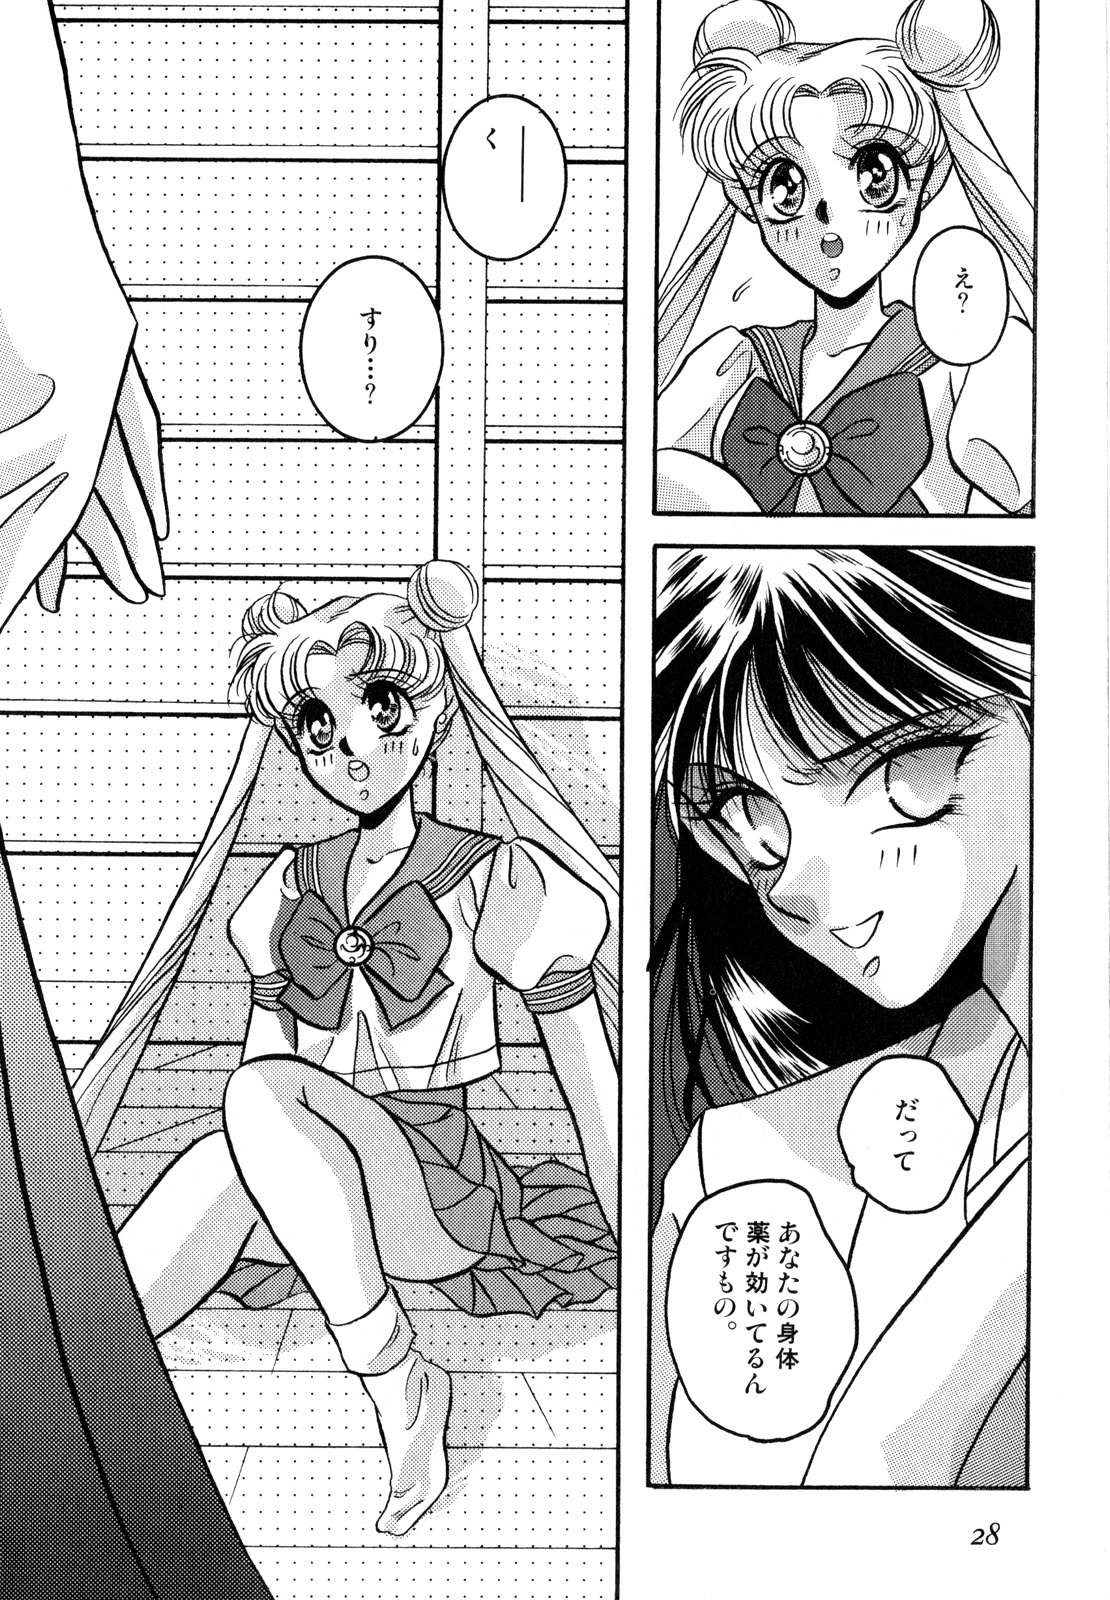 [Anthology] Lunatic Party 2 (Sailor Moon) page 29 full